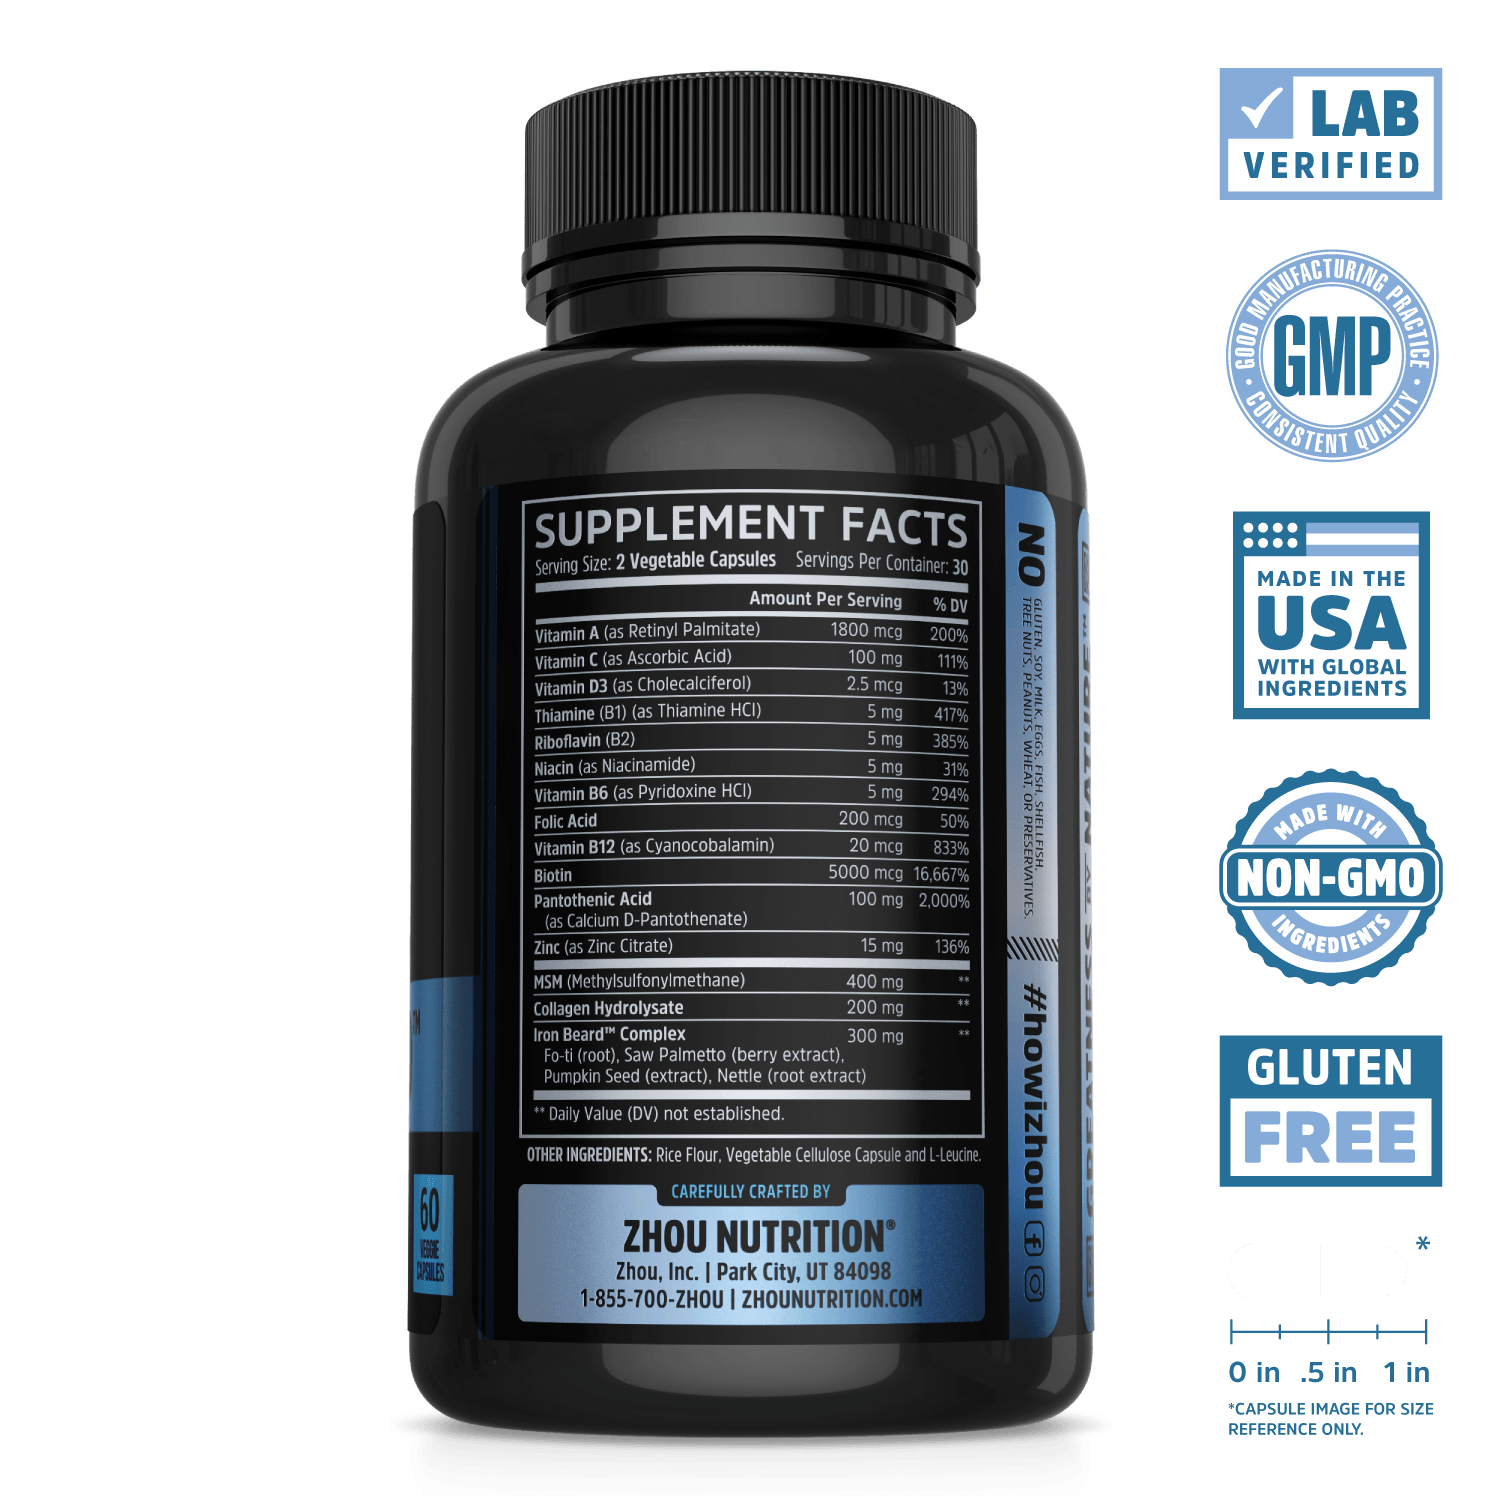 Iron Beard Supplement from Zhou Nutrition. Lab verified, good manufacturing practice, made in the USA with global ingredients, made with non-GMO ingredients, gluten free